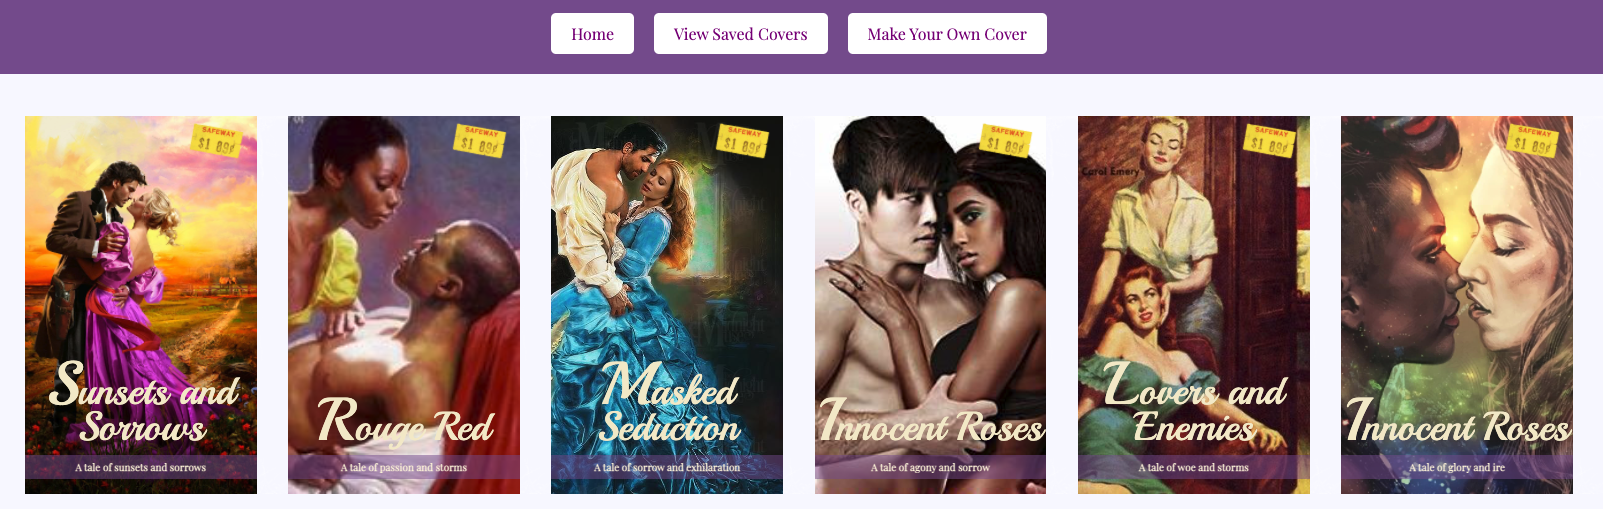 View Your Saved Covers